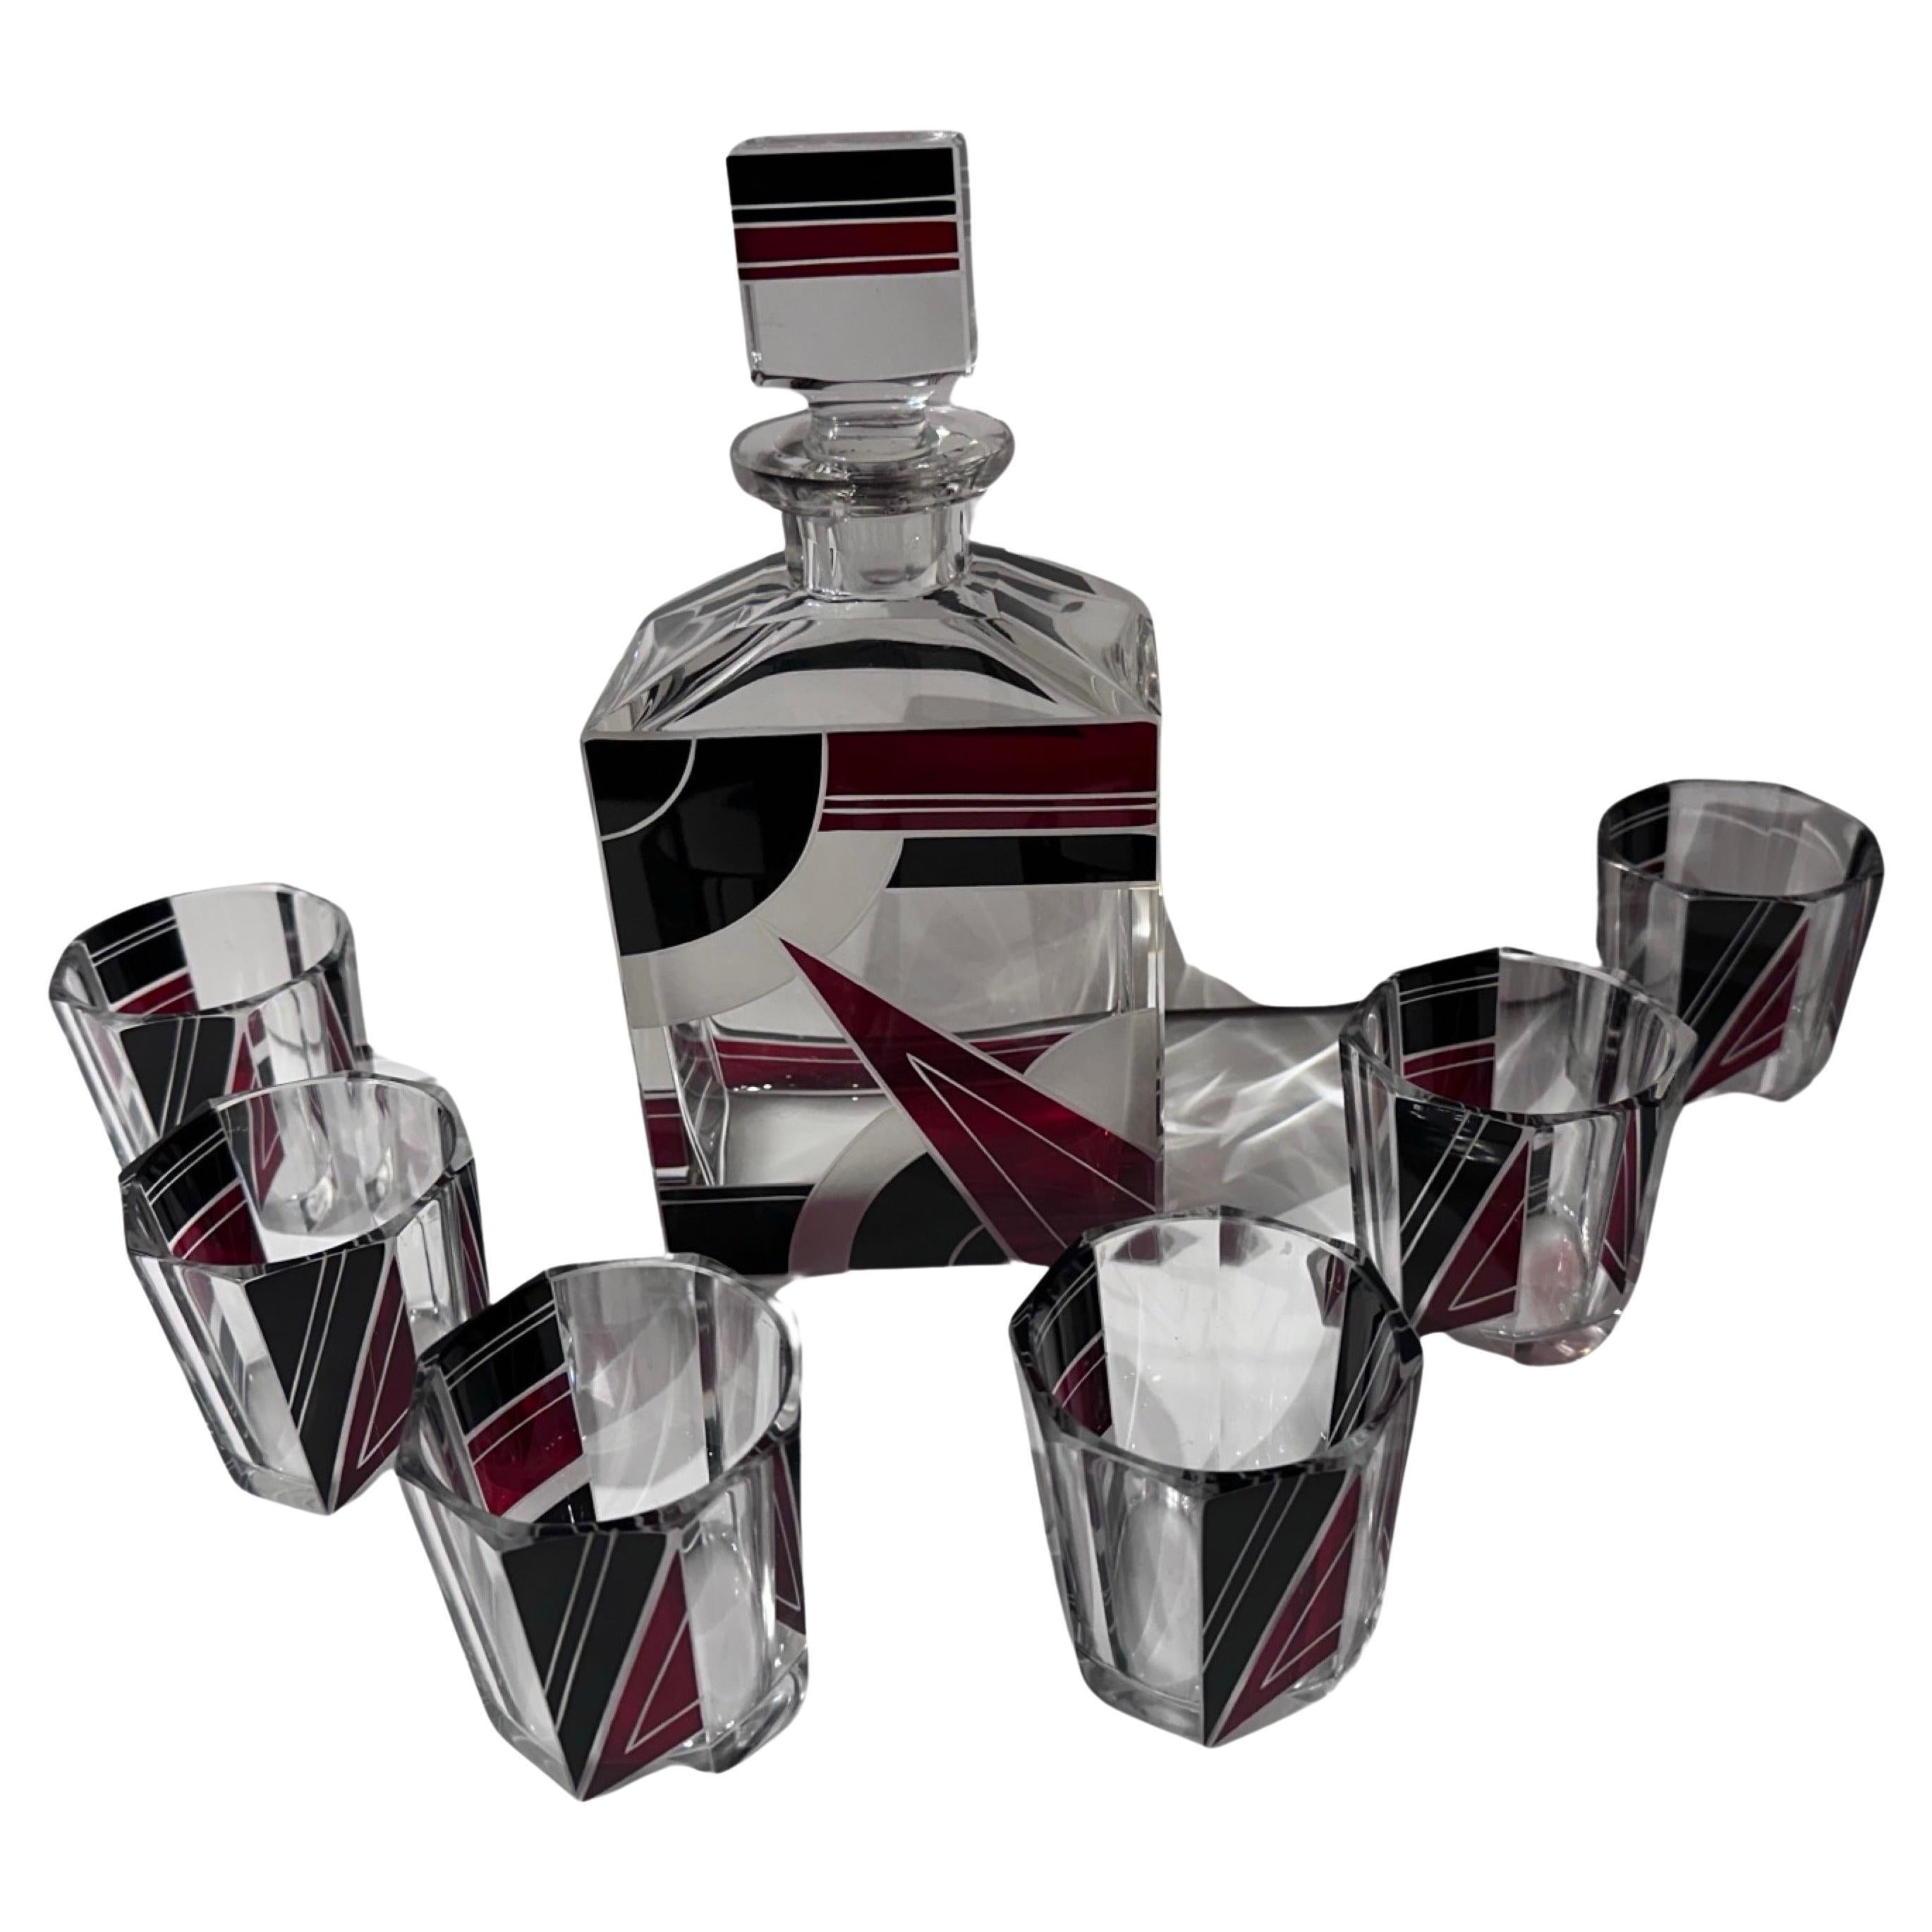 Art Deco Decanter and Whiskey Glasses by Karl Palda